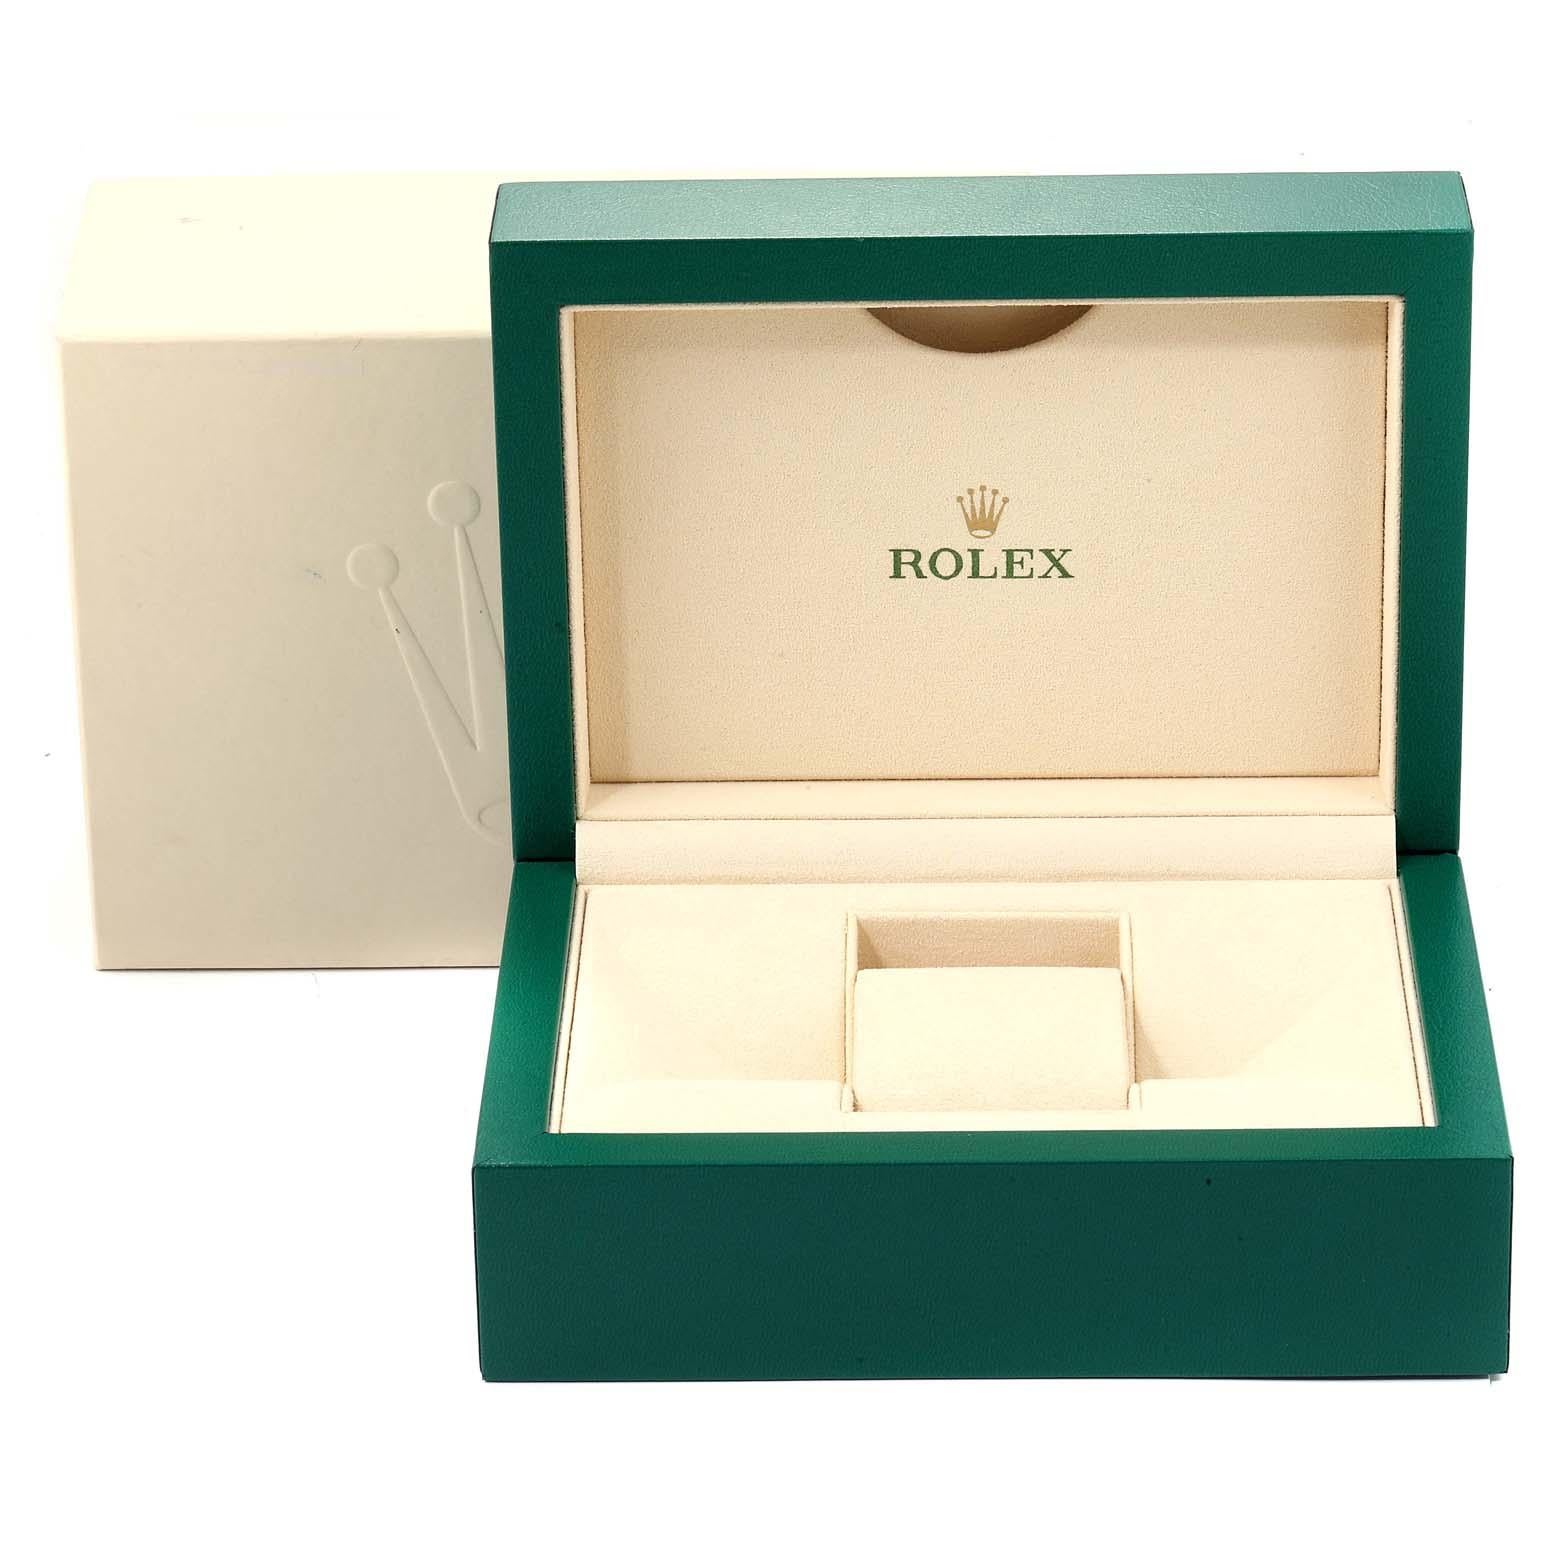 Rolex Submariner Steel Yellow Gold Black Dial Automatic Men's Watch 116613 For Sale 8